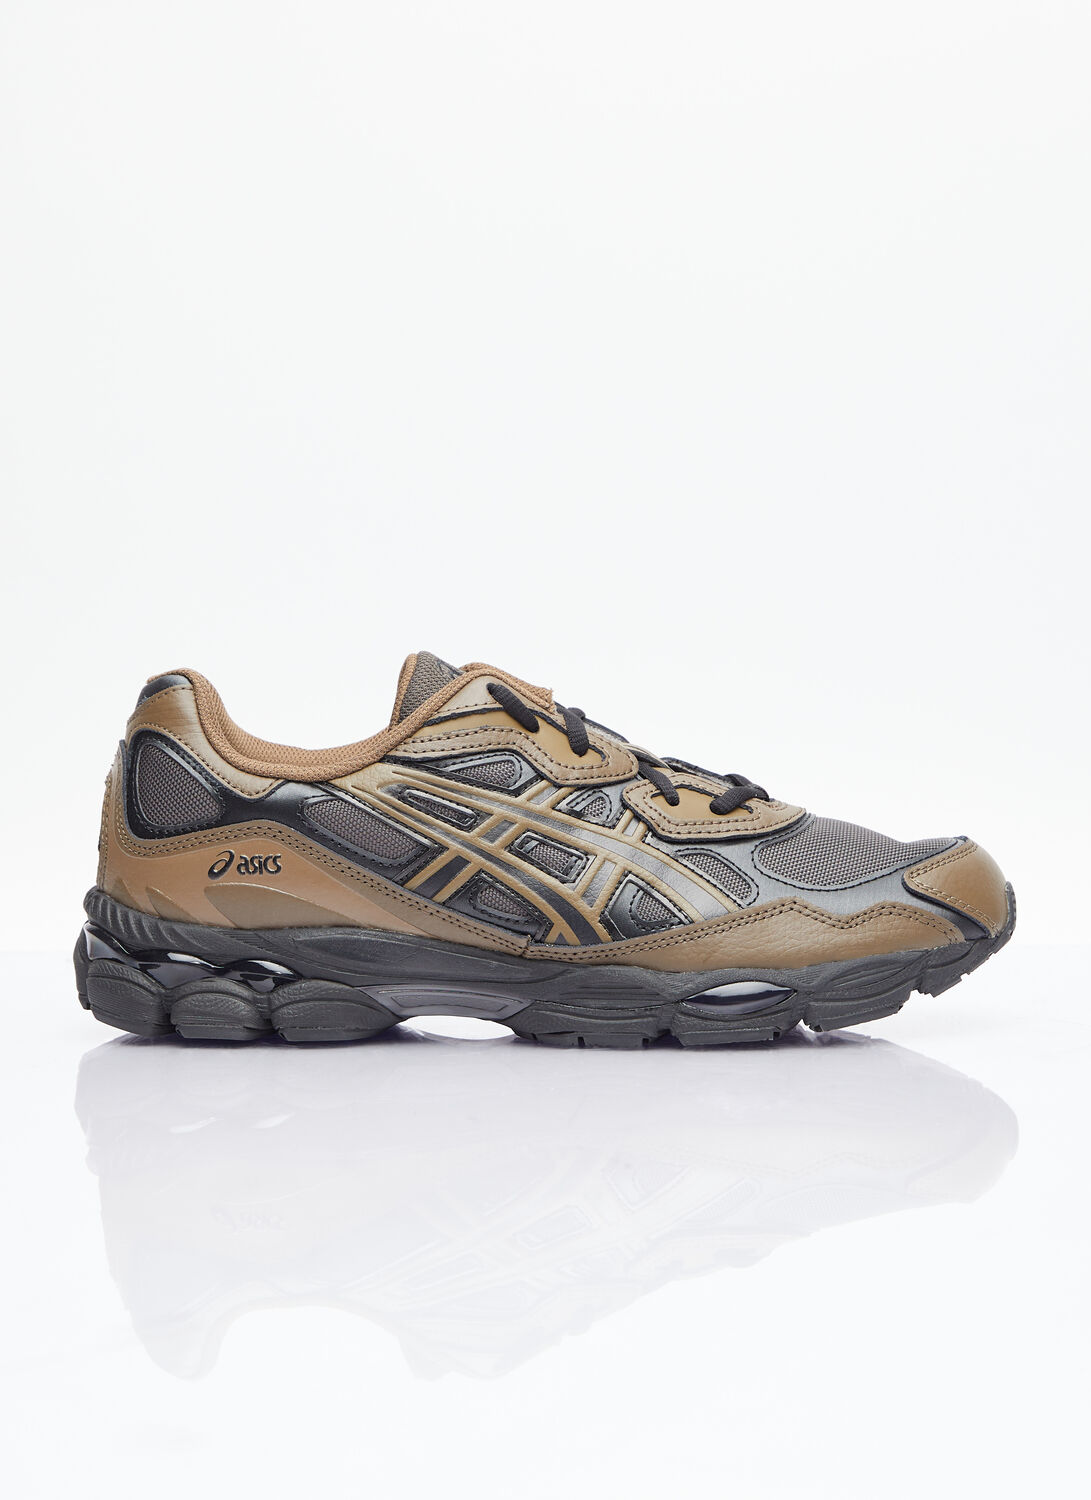 Asics Gel-nyc Trainers In Brown